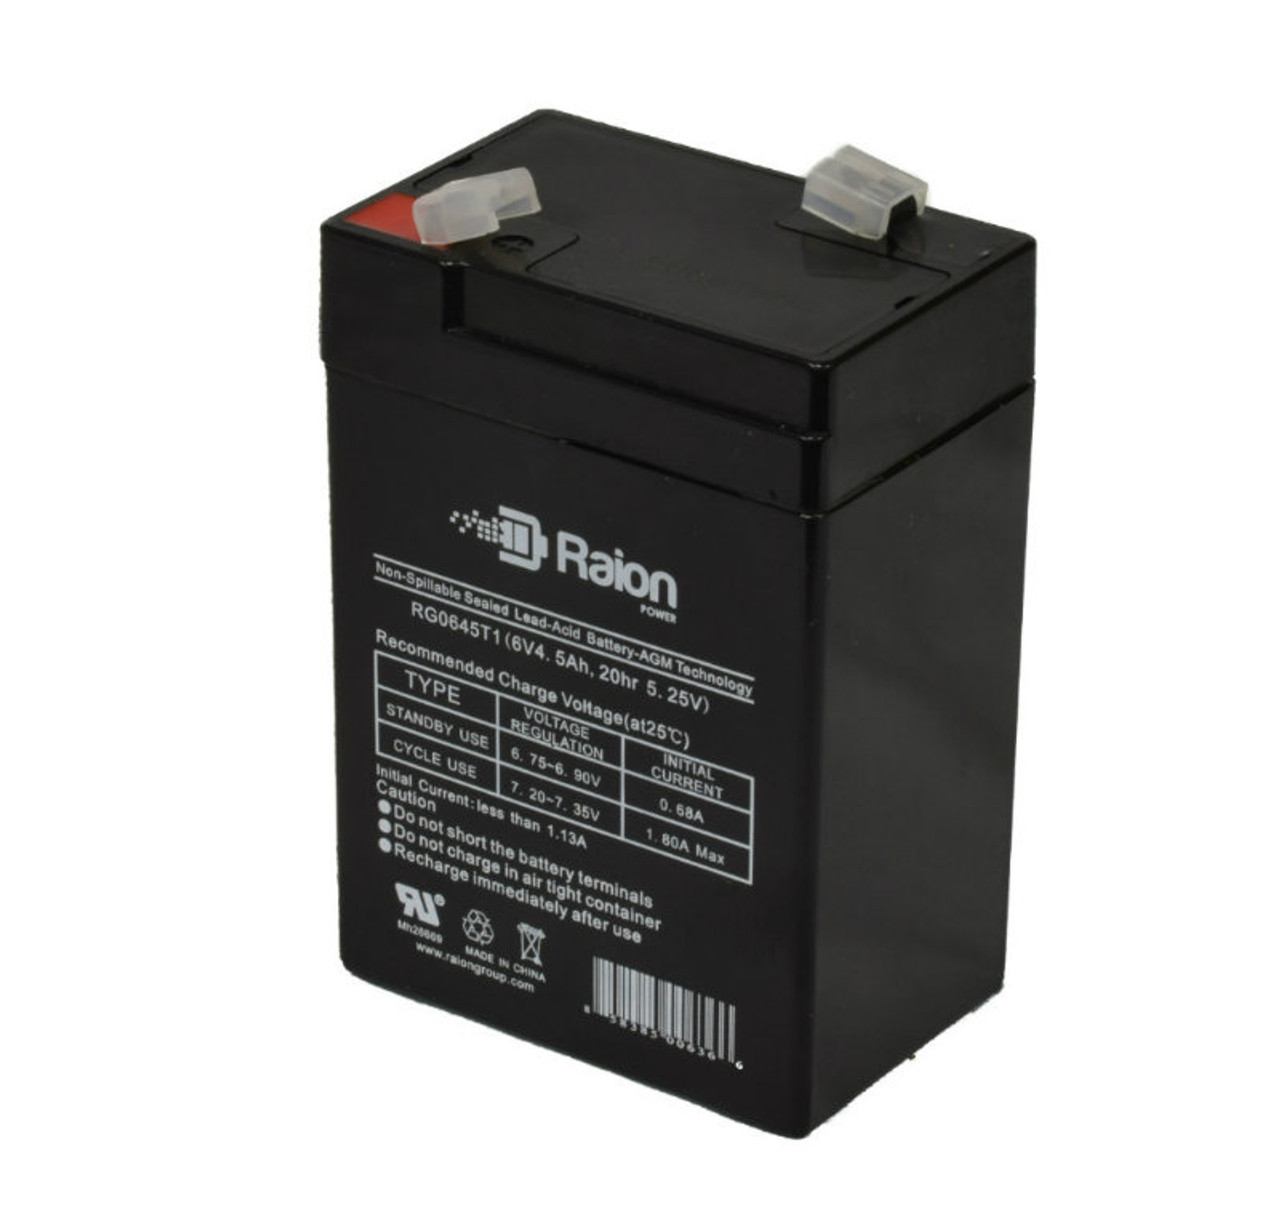 Raion Power RG0645T1 6V 4.5Ah Replacement Battery Cartridge for Dual-Lite LZ2